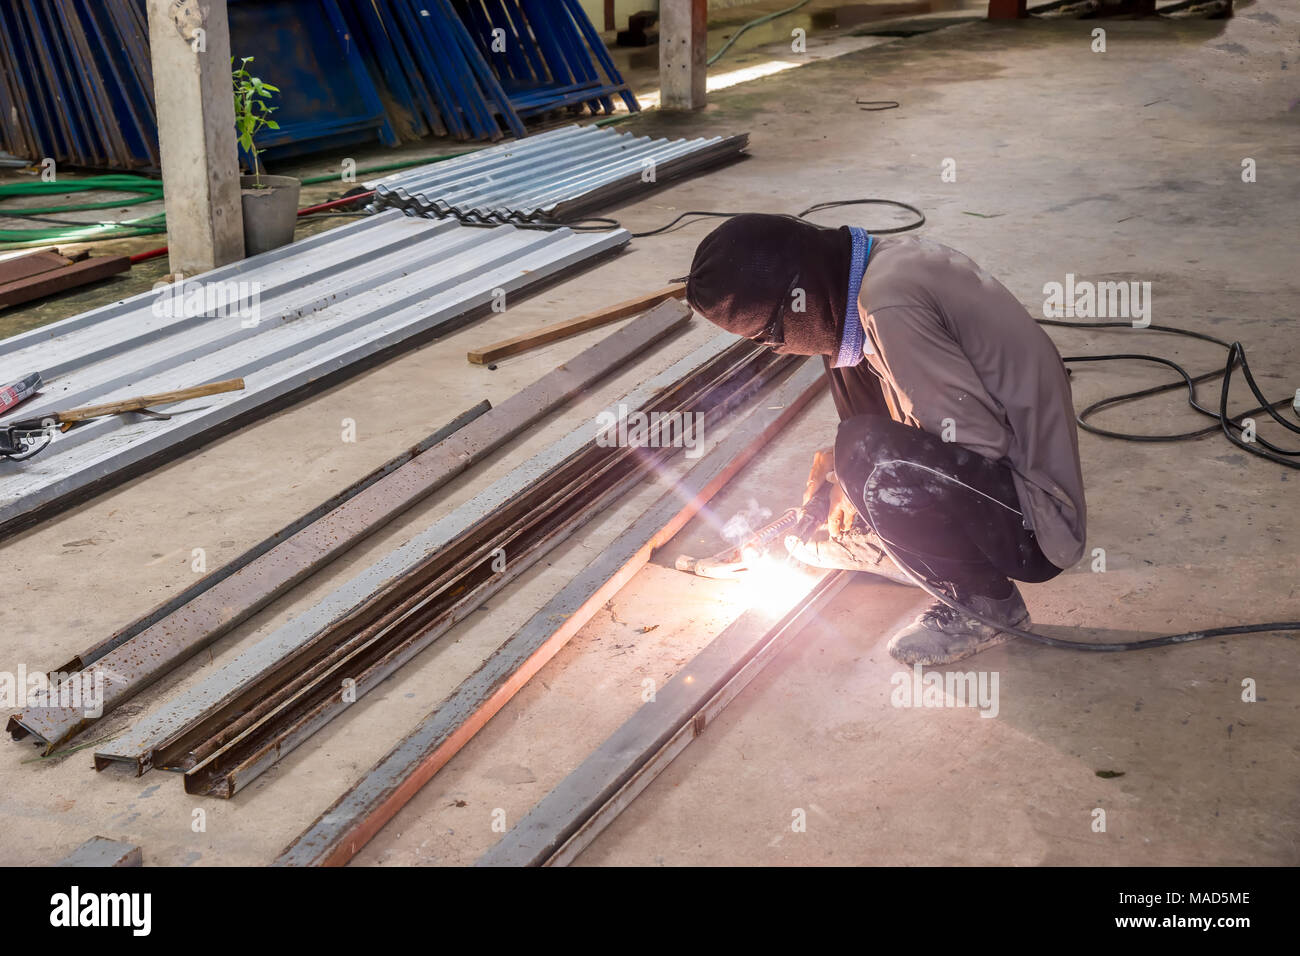 Un-identified worker man welding metal rod for house construction Stock Photo